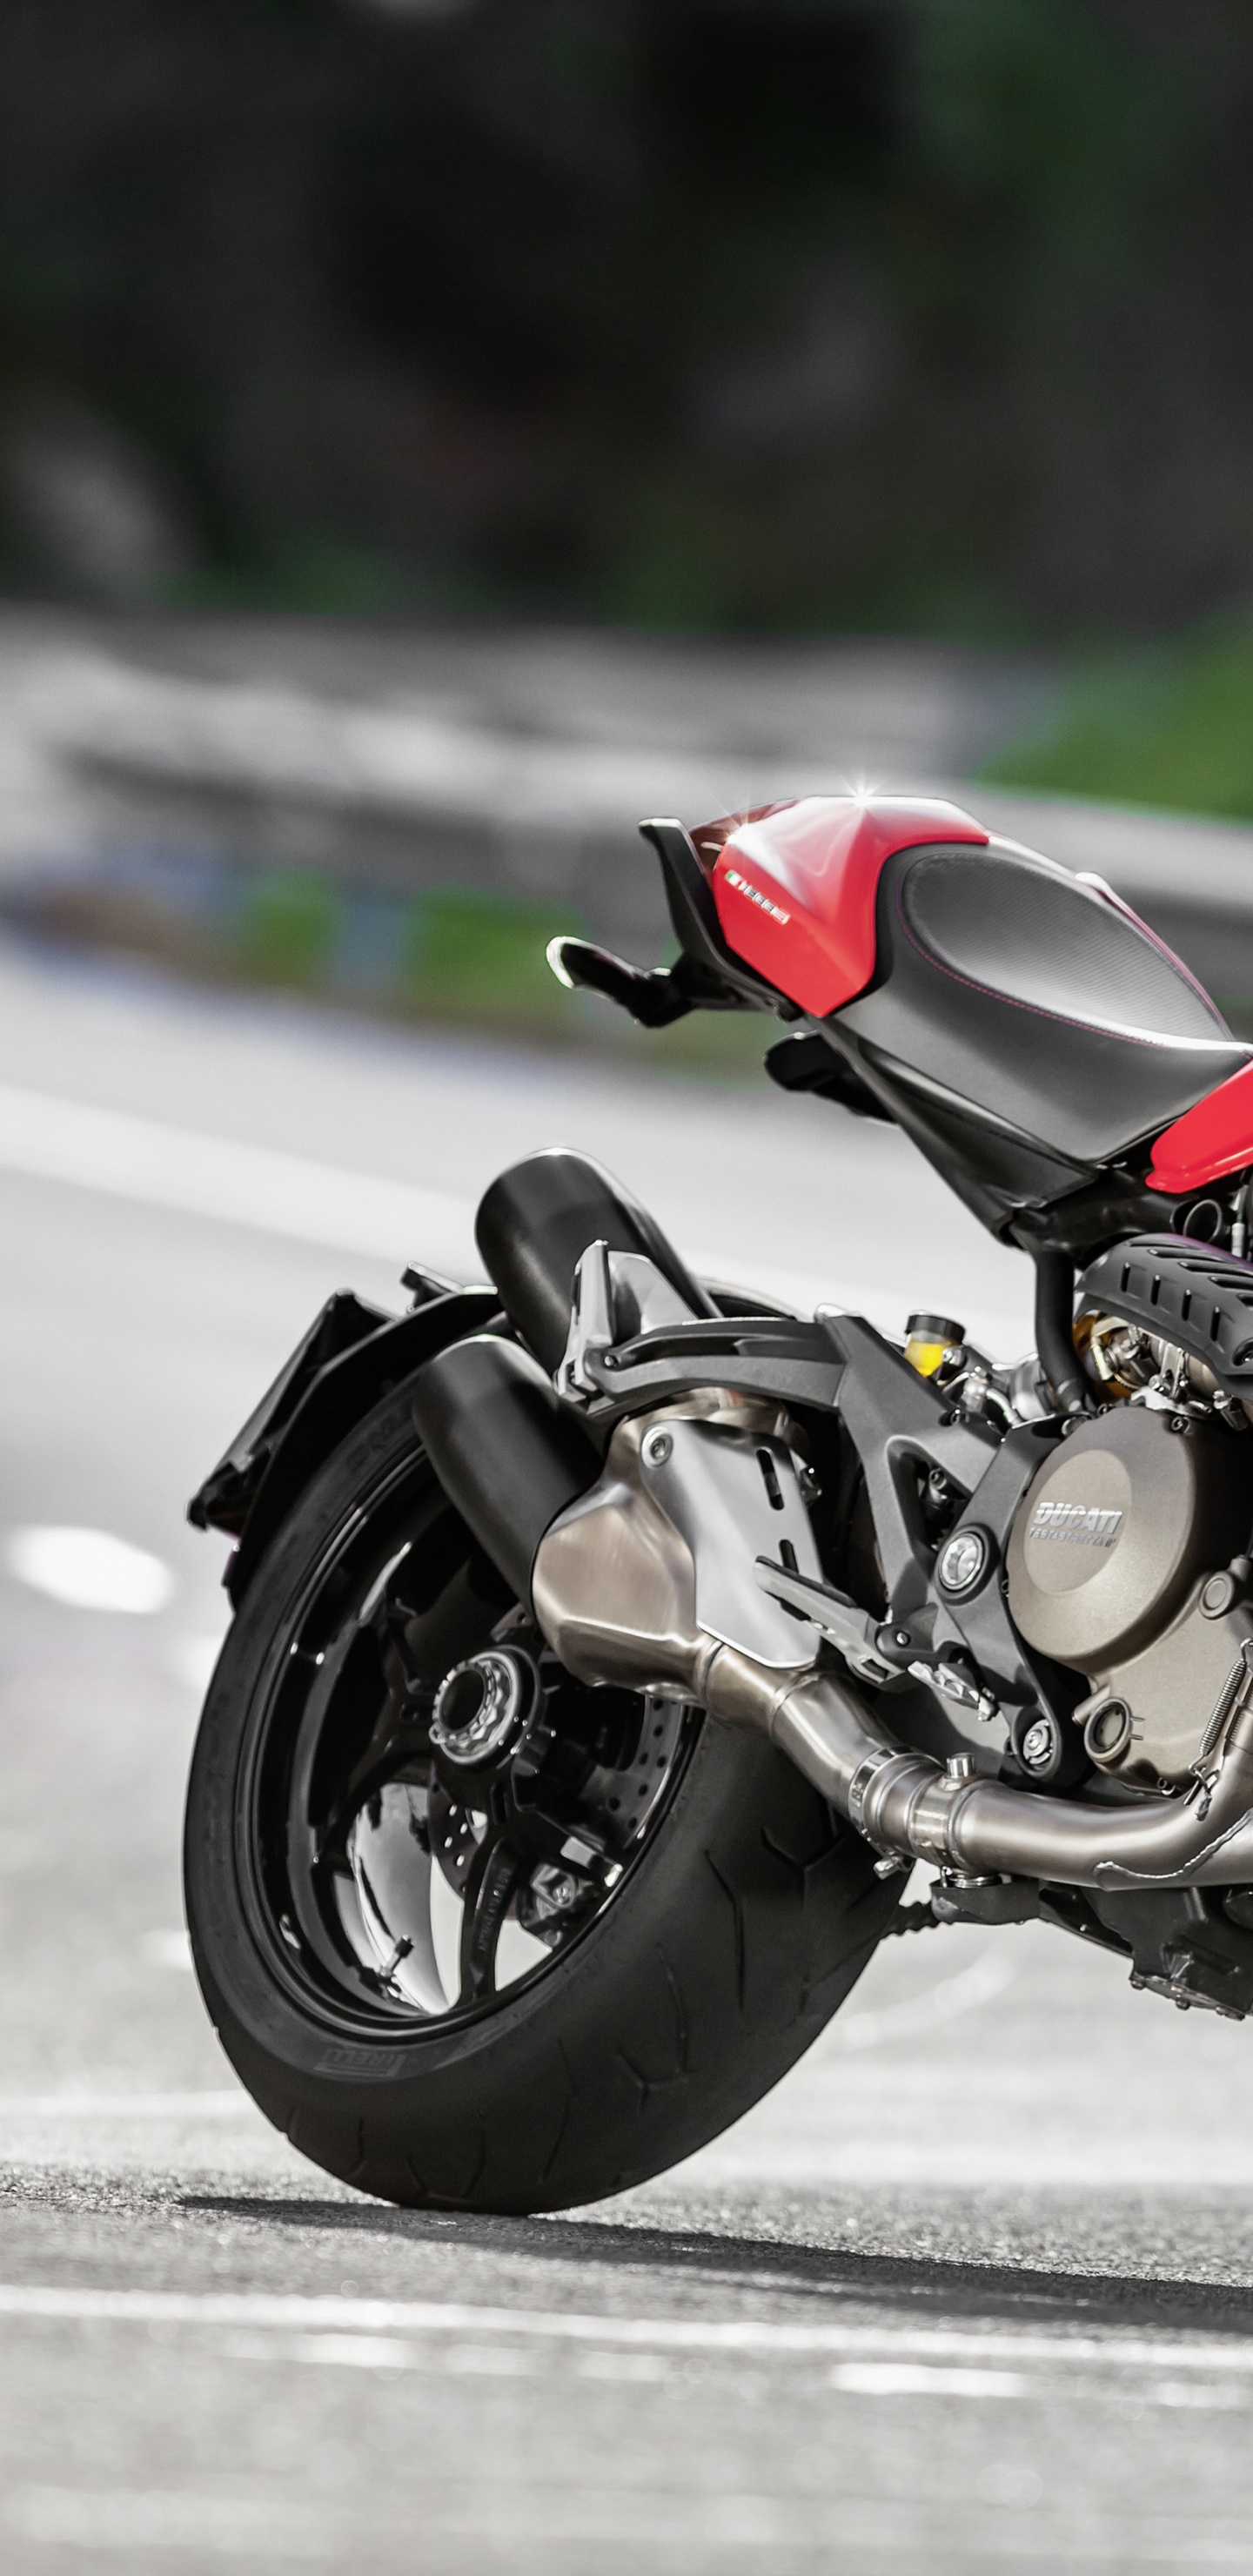 Red and Black Sports Bike on Road During Daytime. Wallpaper in 1440x2960 Resolution